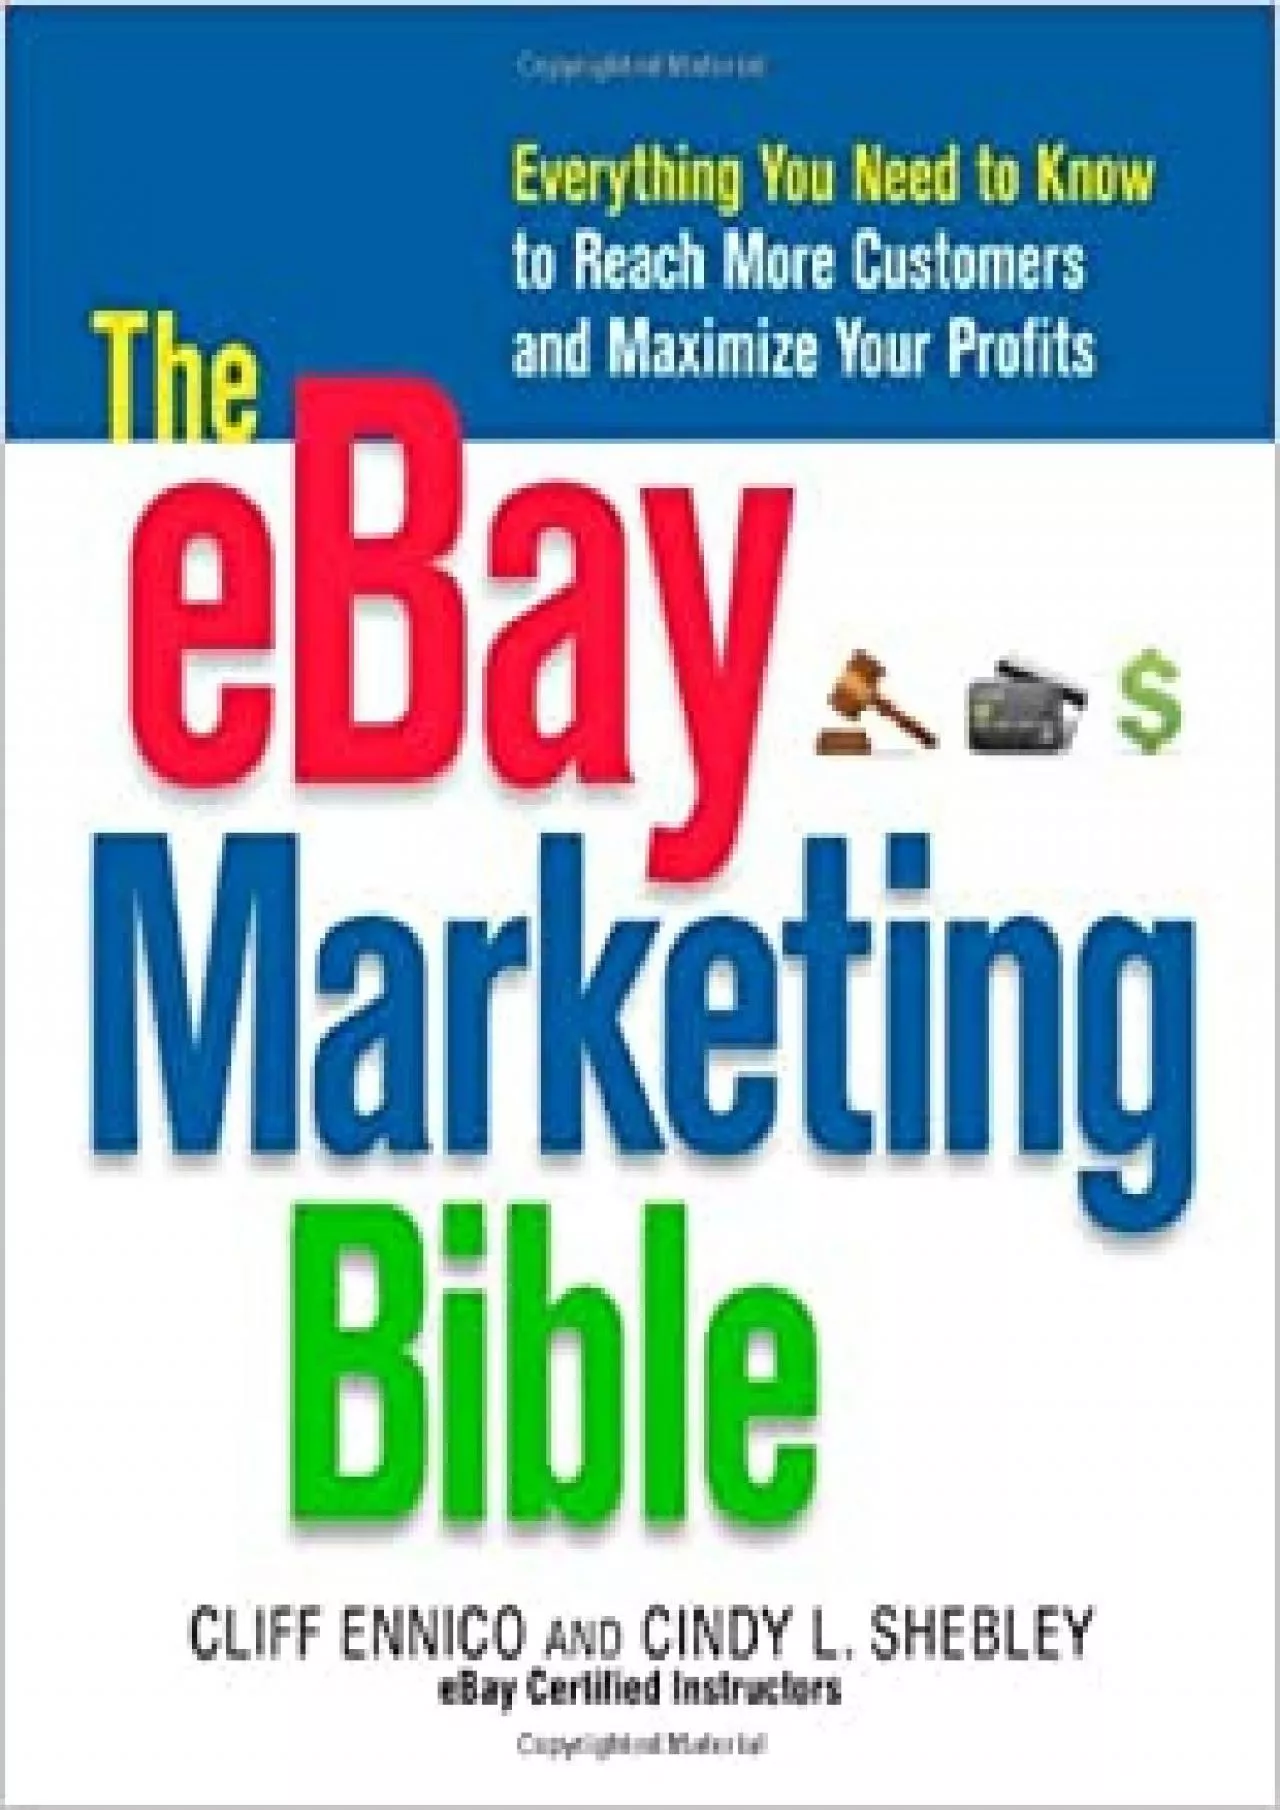 The eBay Marketing Bible: Everything You Need to Know to Reach More Customers and Maximize